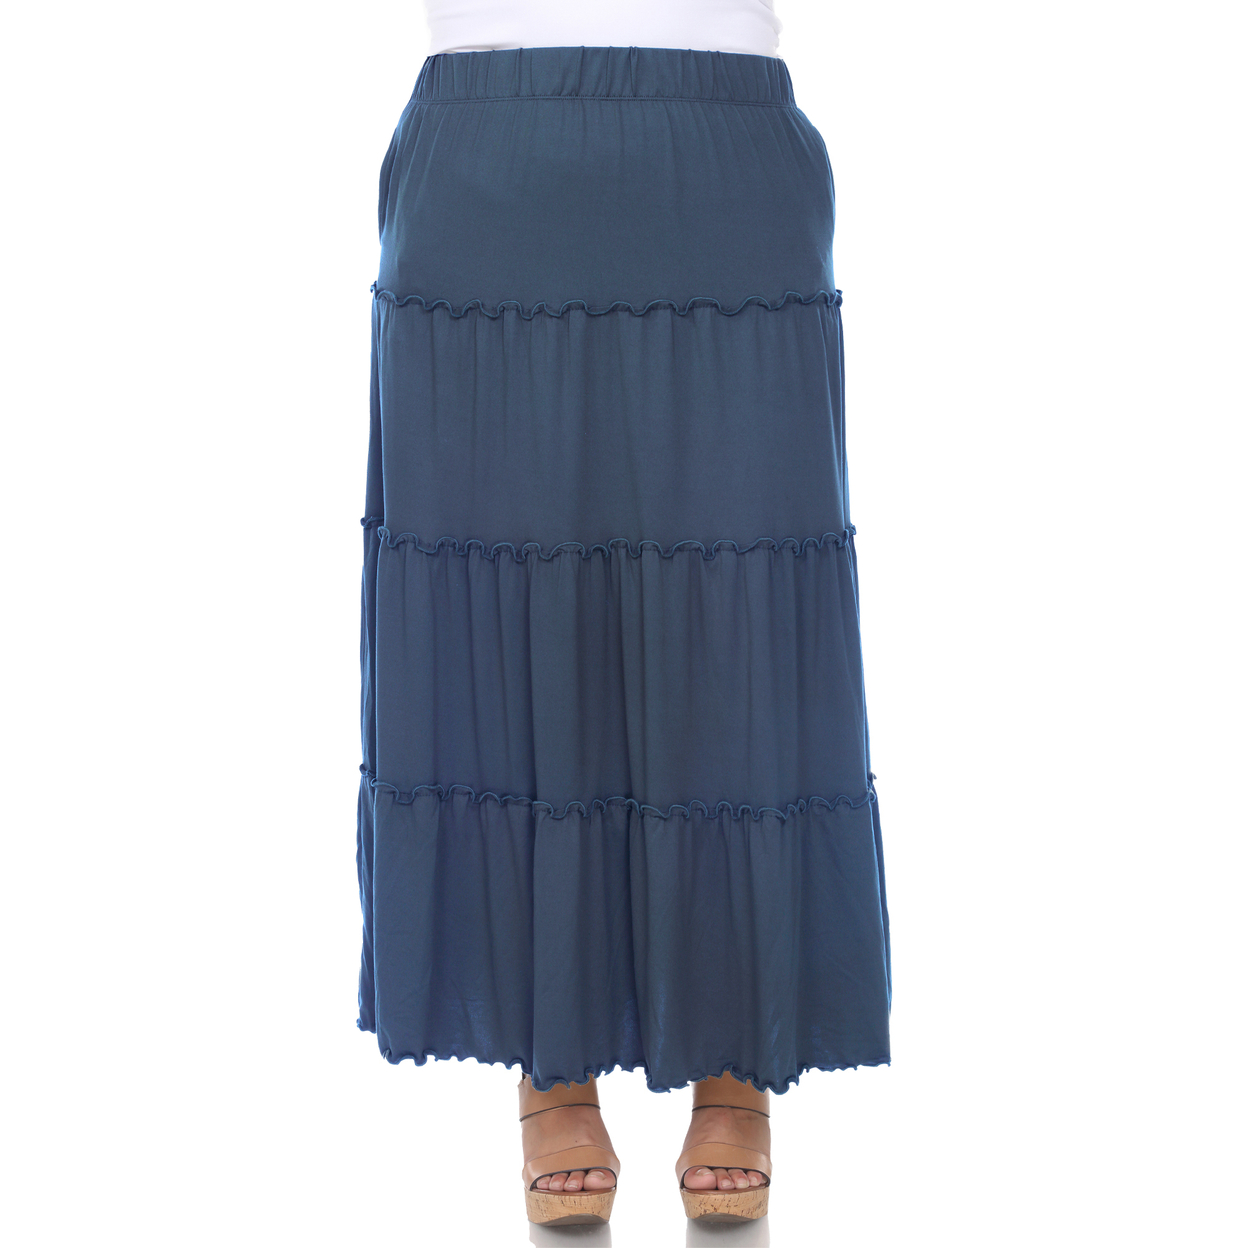 White Mark Women's Plus Size Tiered Maxi Skirt With Pockets - Denim Blue, 2x